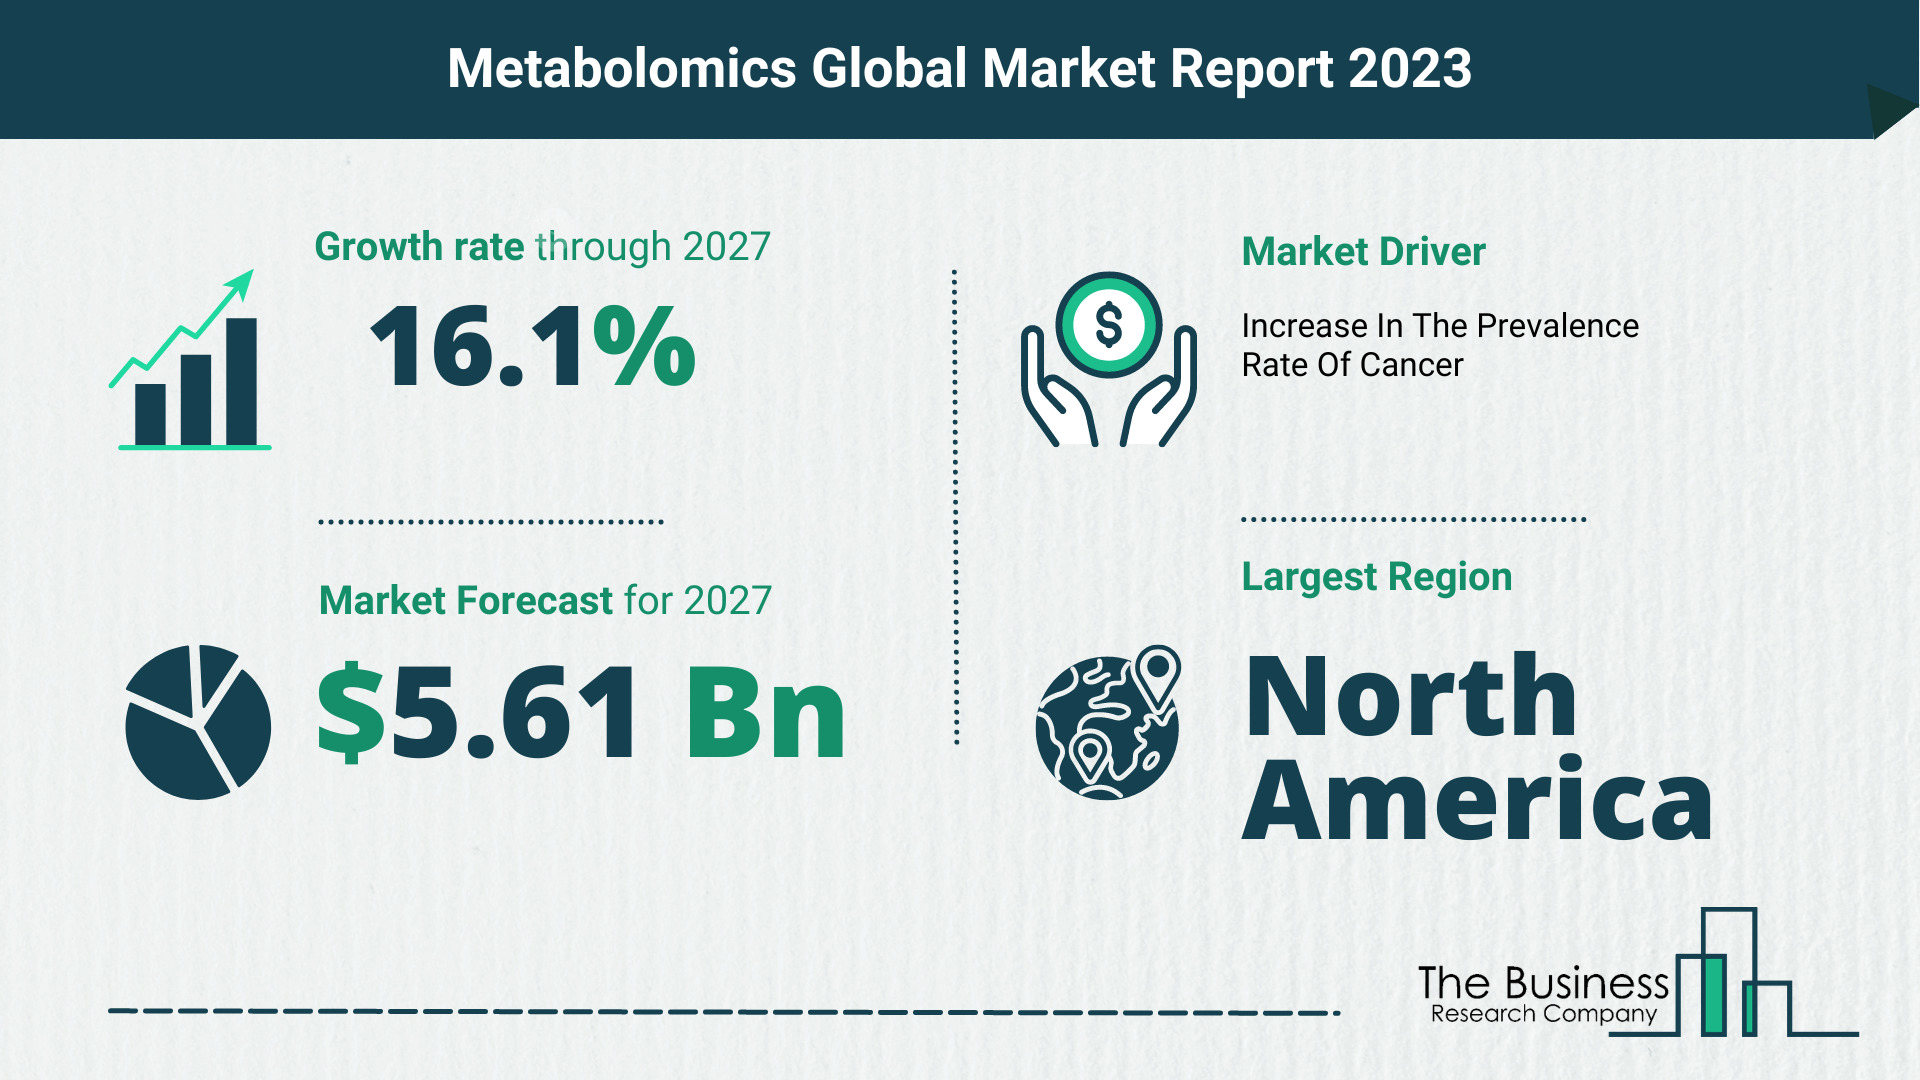 What Will The Metabolomics Market Look Like In 2023?